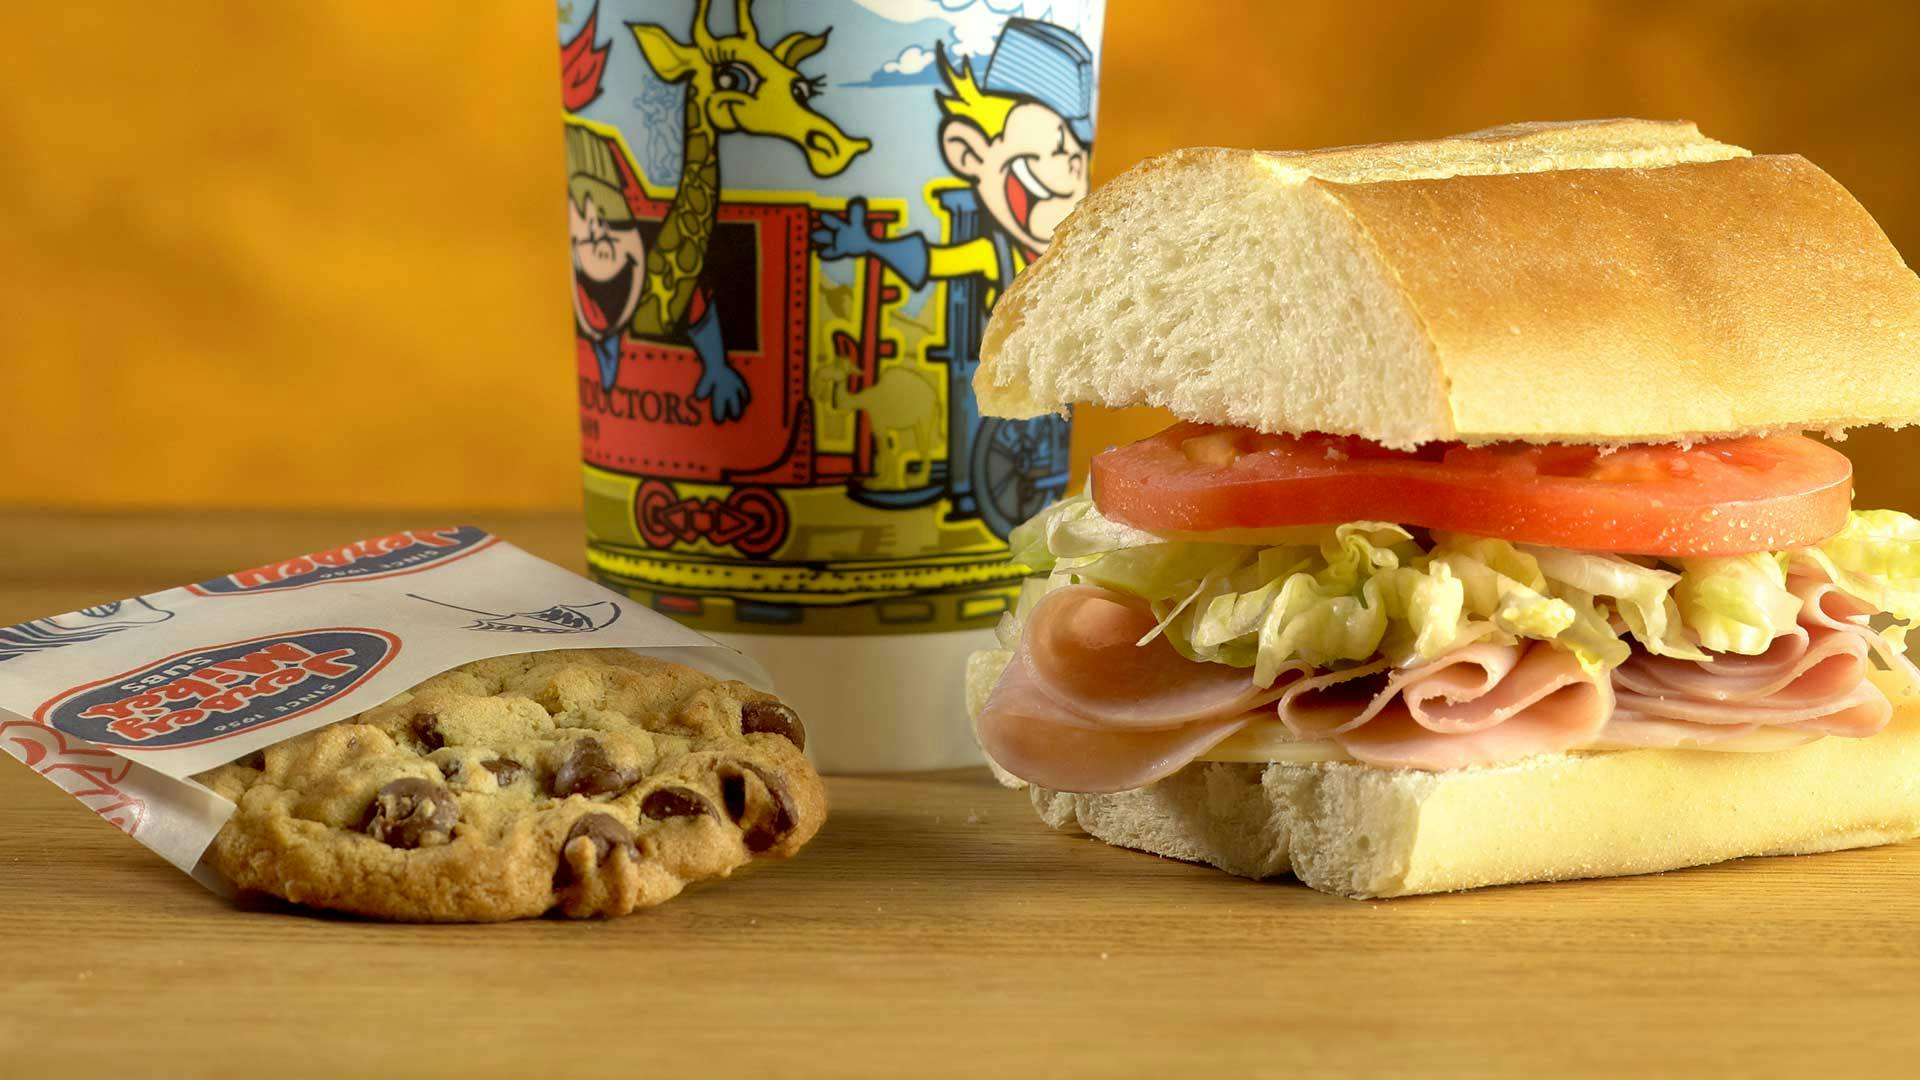 Jersey Mike's kids meal 